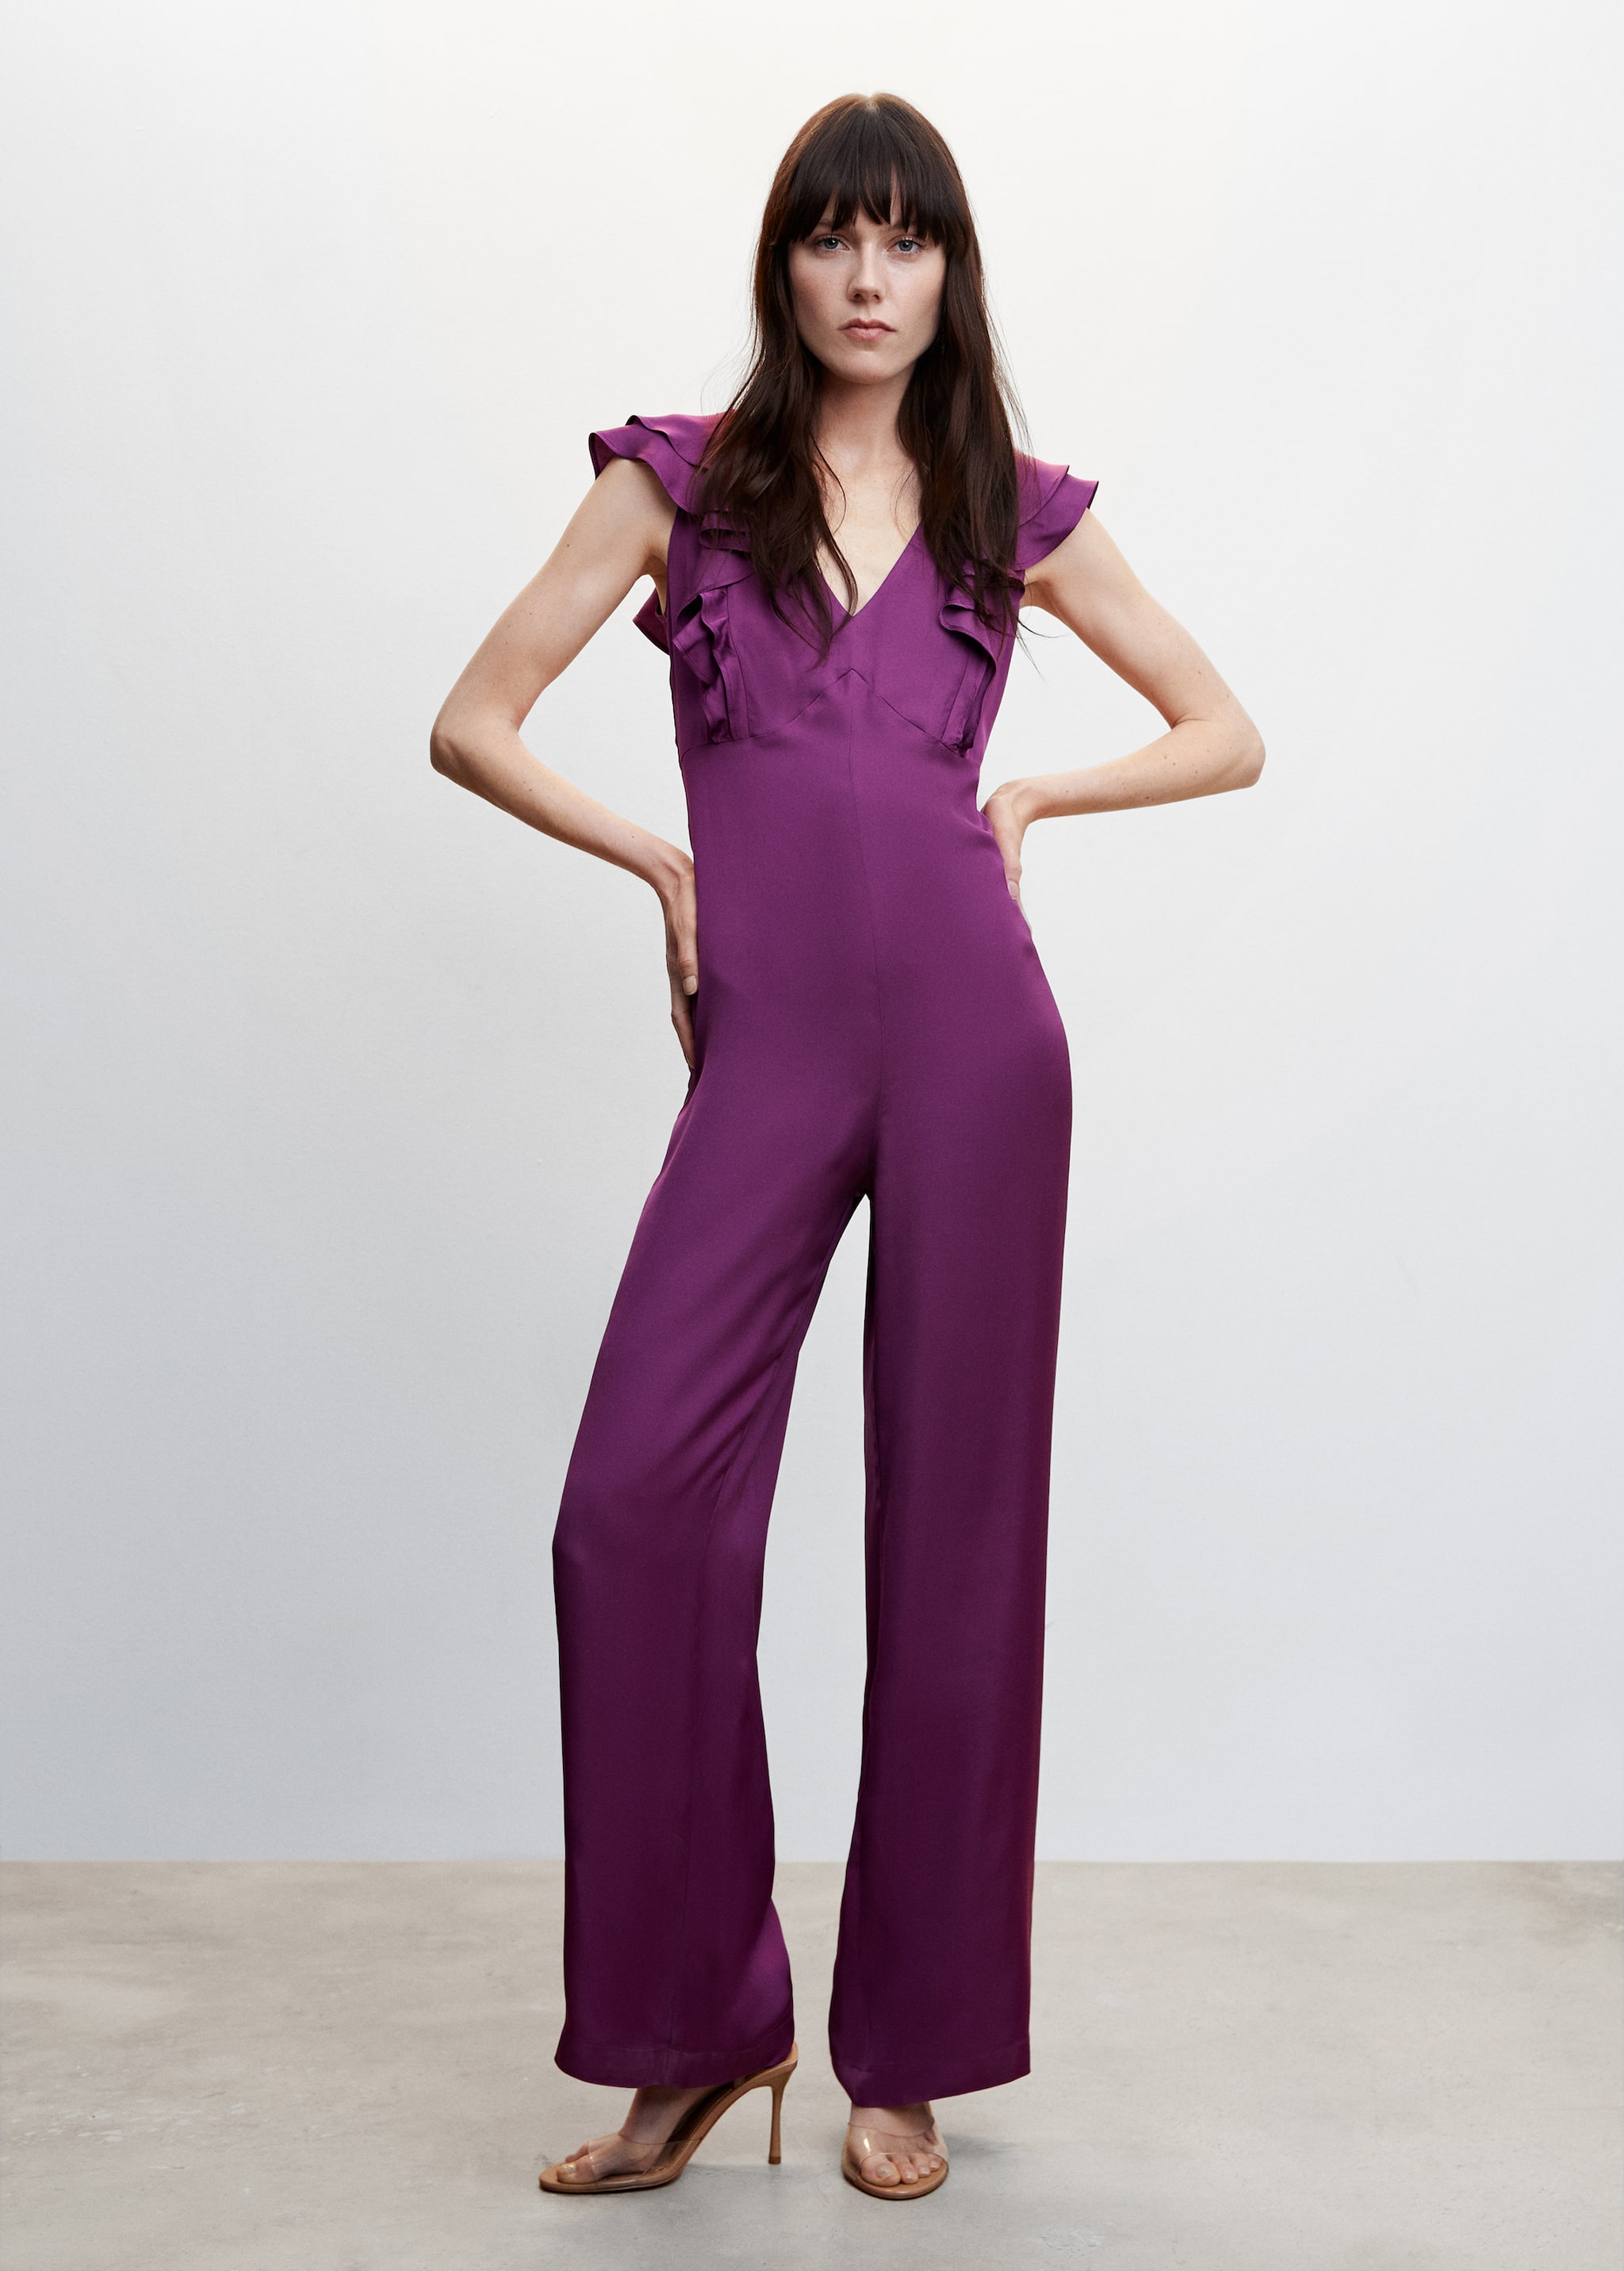 Ruffled jumpsuit with open back - General plane